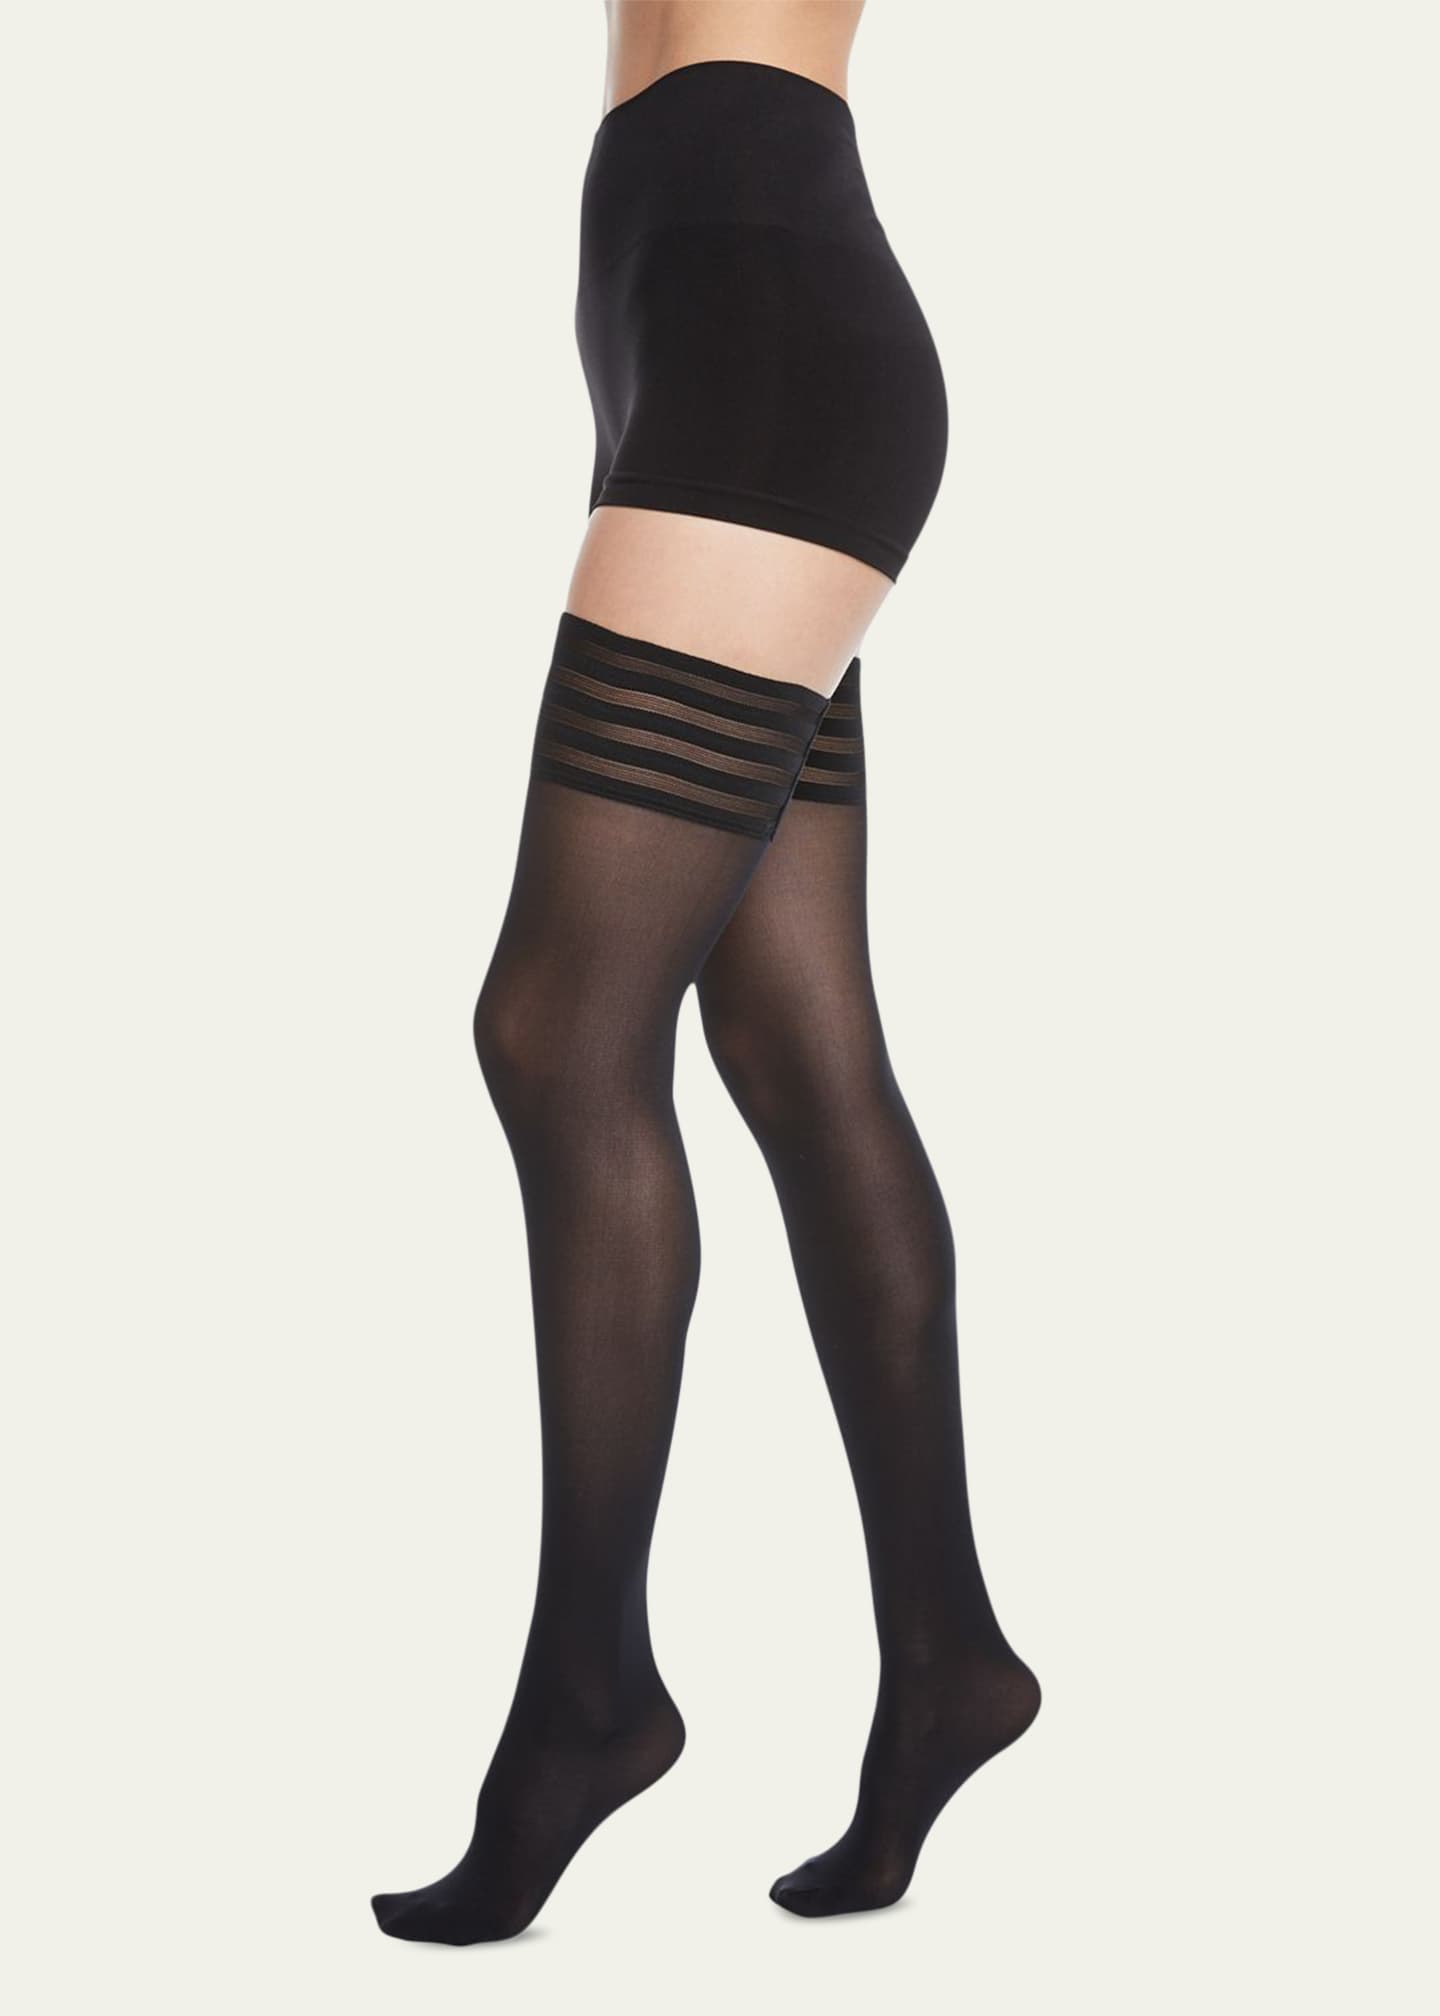 Wolford Velvet De Luxe Stay-Up Thigh Highs Stockings - Bergdorf Goodman